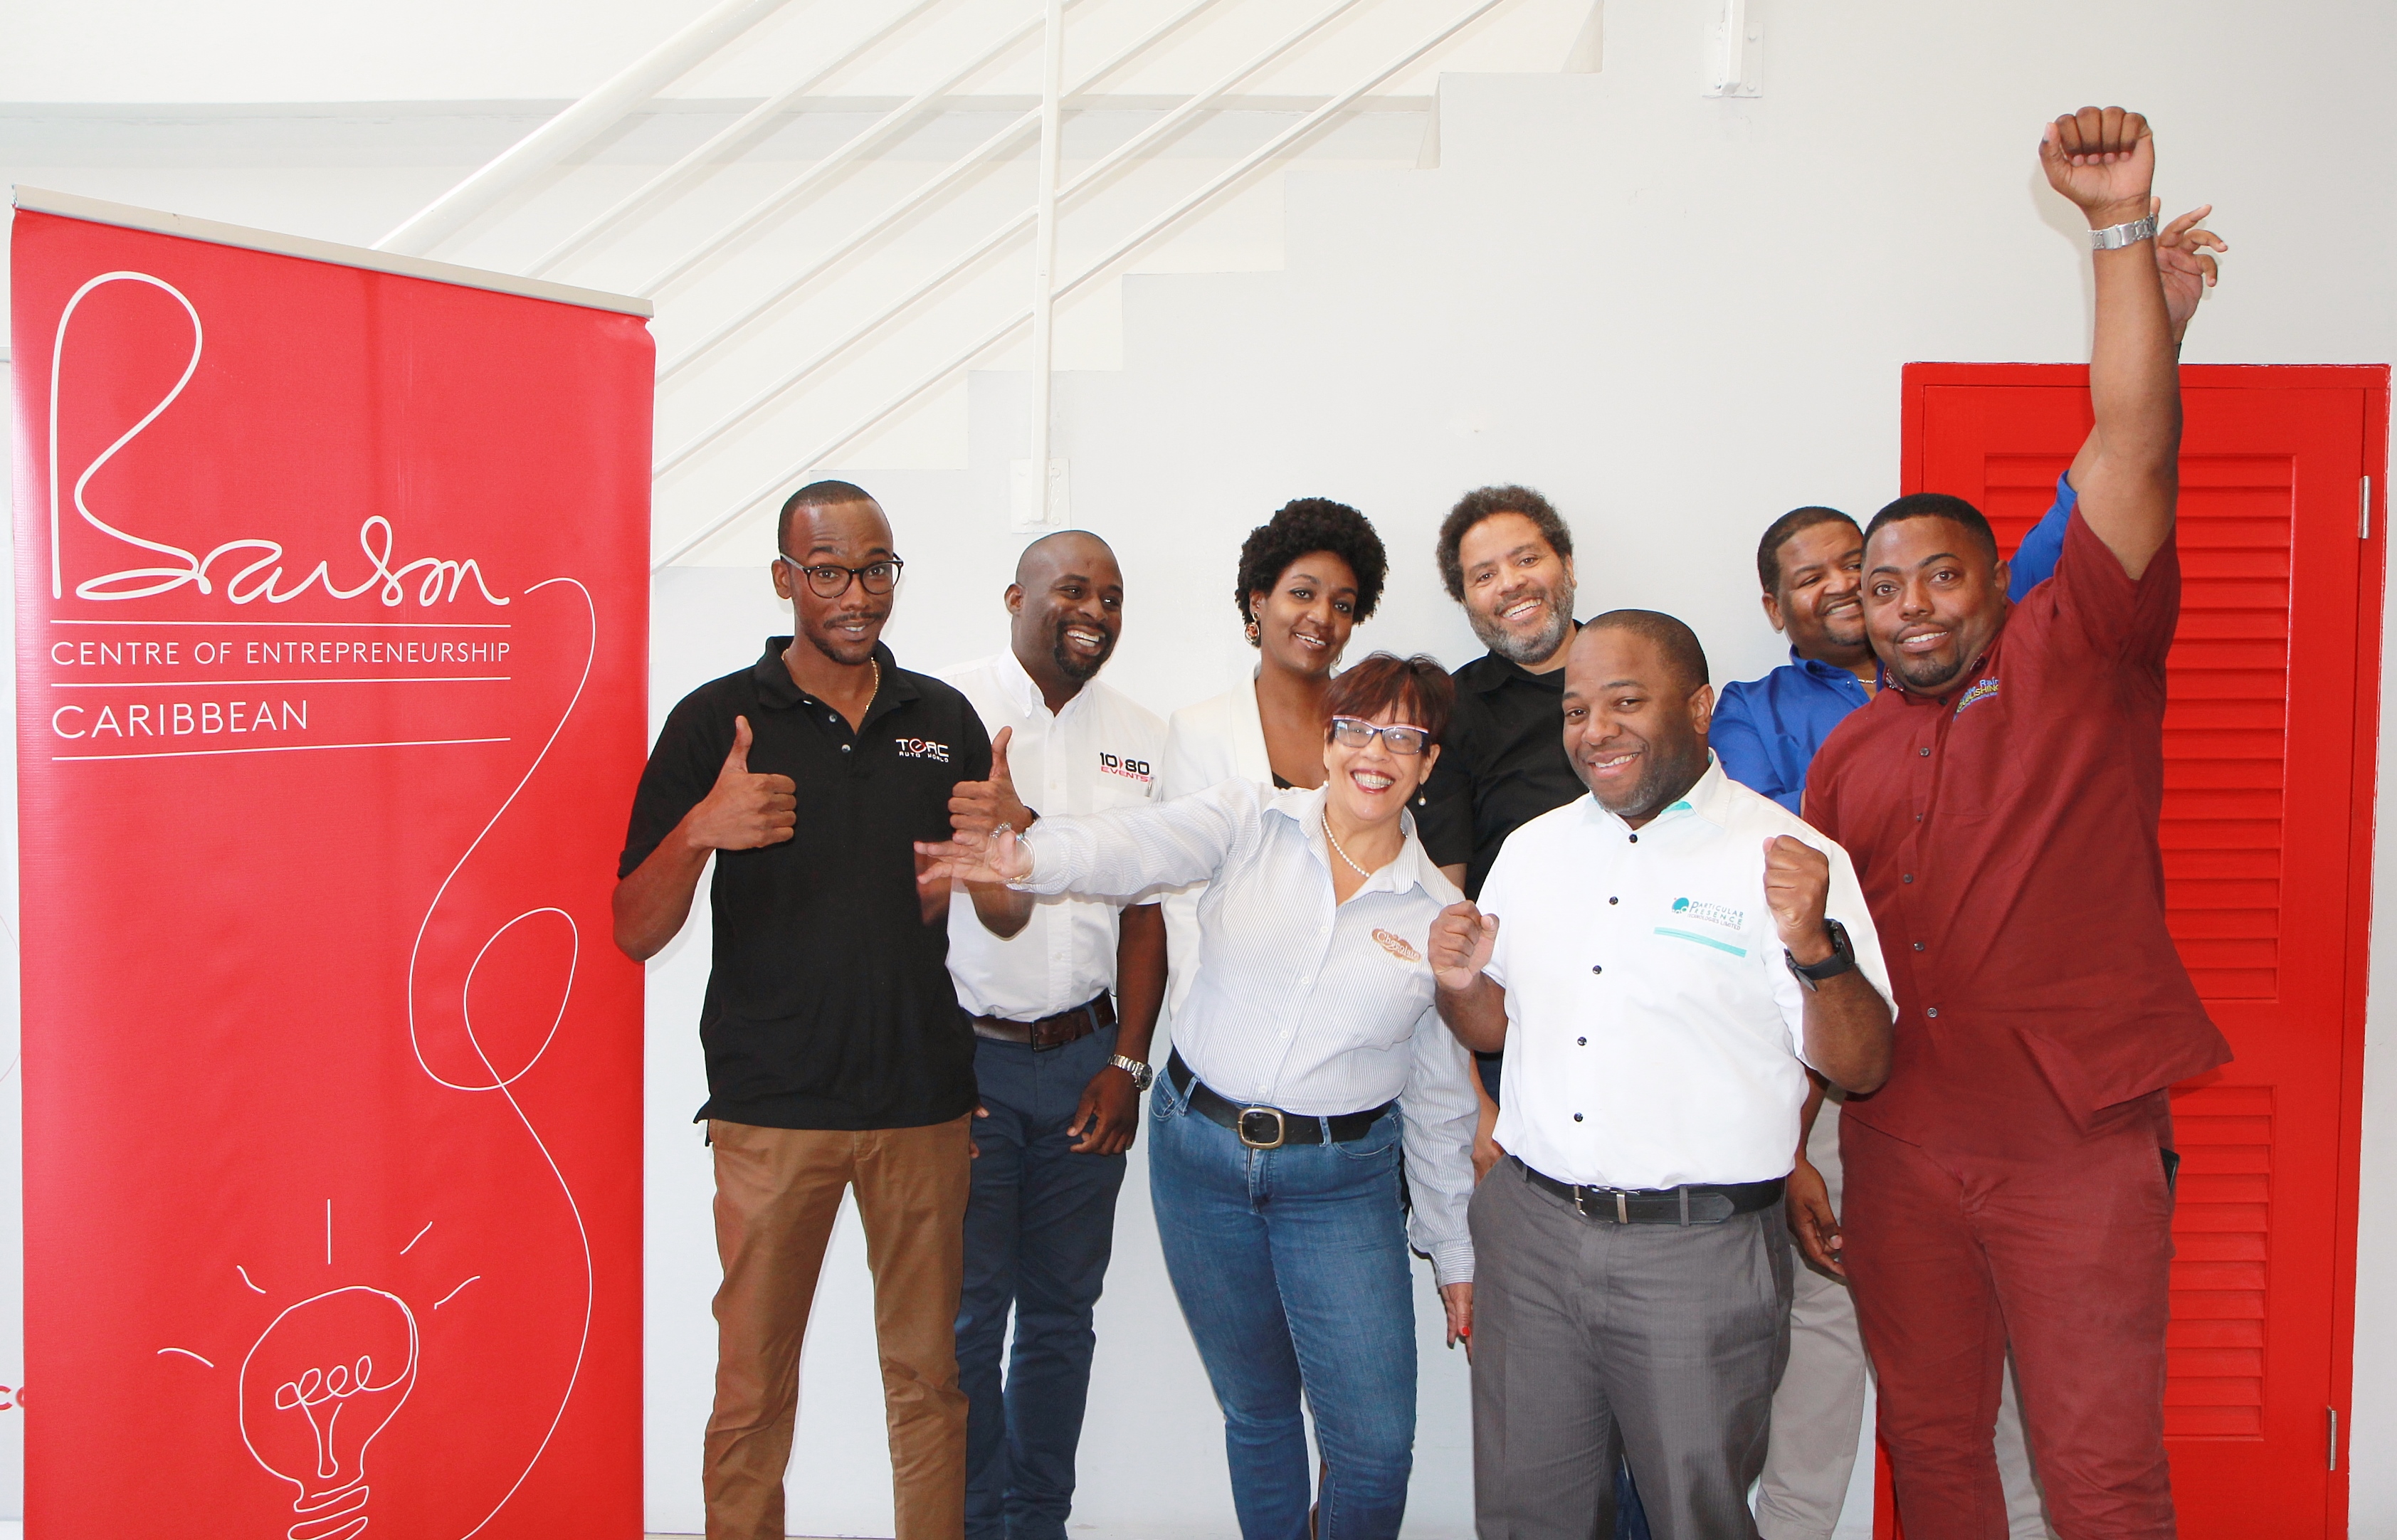 BRANSON CENTRE WELCOMES 14 NEW BUSINESSES TO ITS ACCELERATOR PROGRAMME